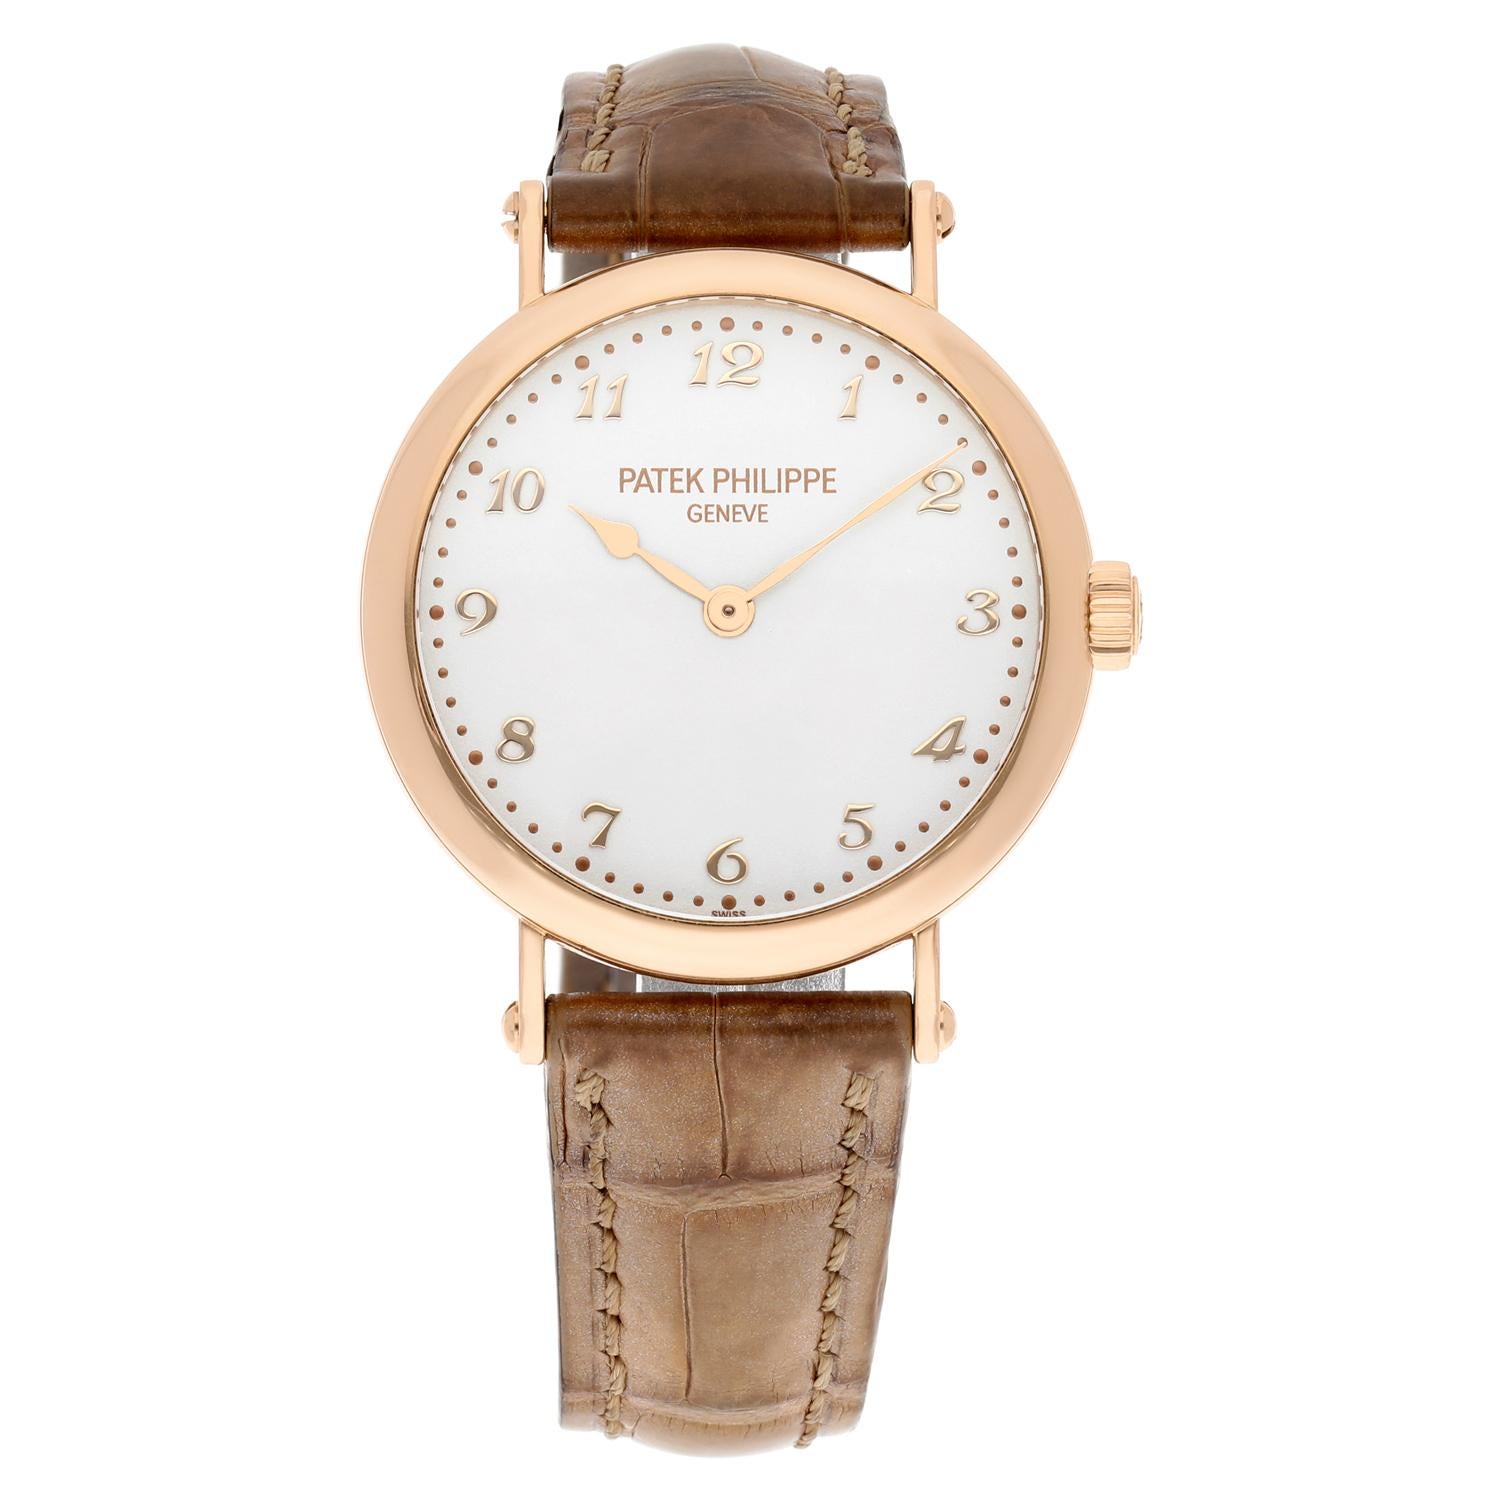 PATEK PHILIPPE CALATRAVA 18K ROSE GOLD ULTRA-THIN 7200R-00
With its pure lines, the calatrava is recognized as the very essence of the round wristwatch and one of the finest symbols of the Patek Philippe style. Supremely elegant, it charms each new